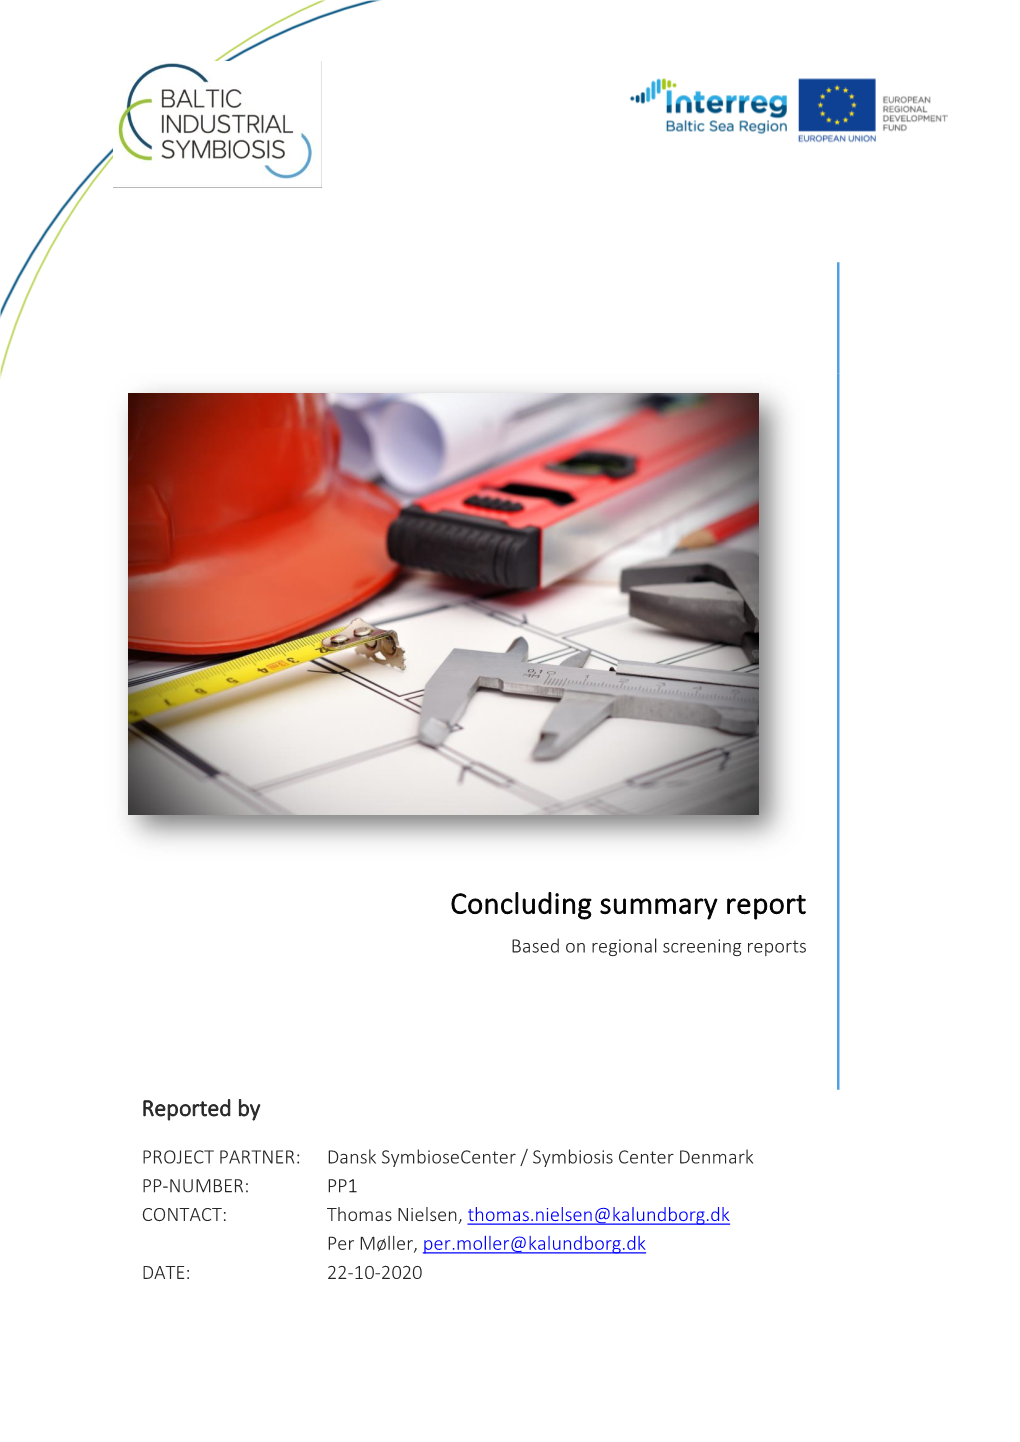 Concluding Summary Report Based on Regional Screening Reports